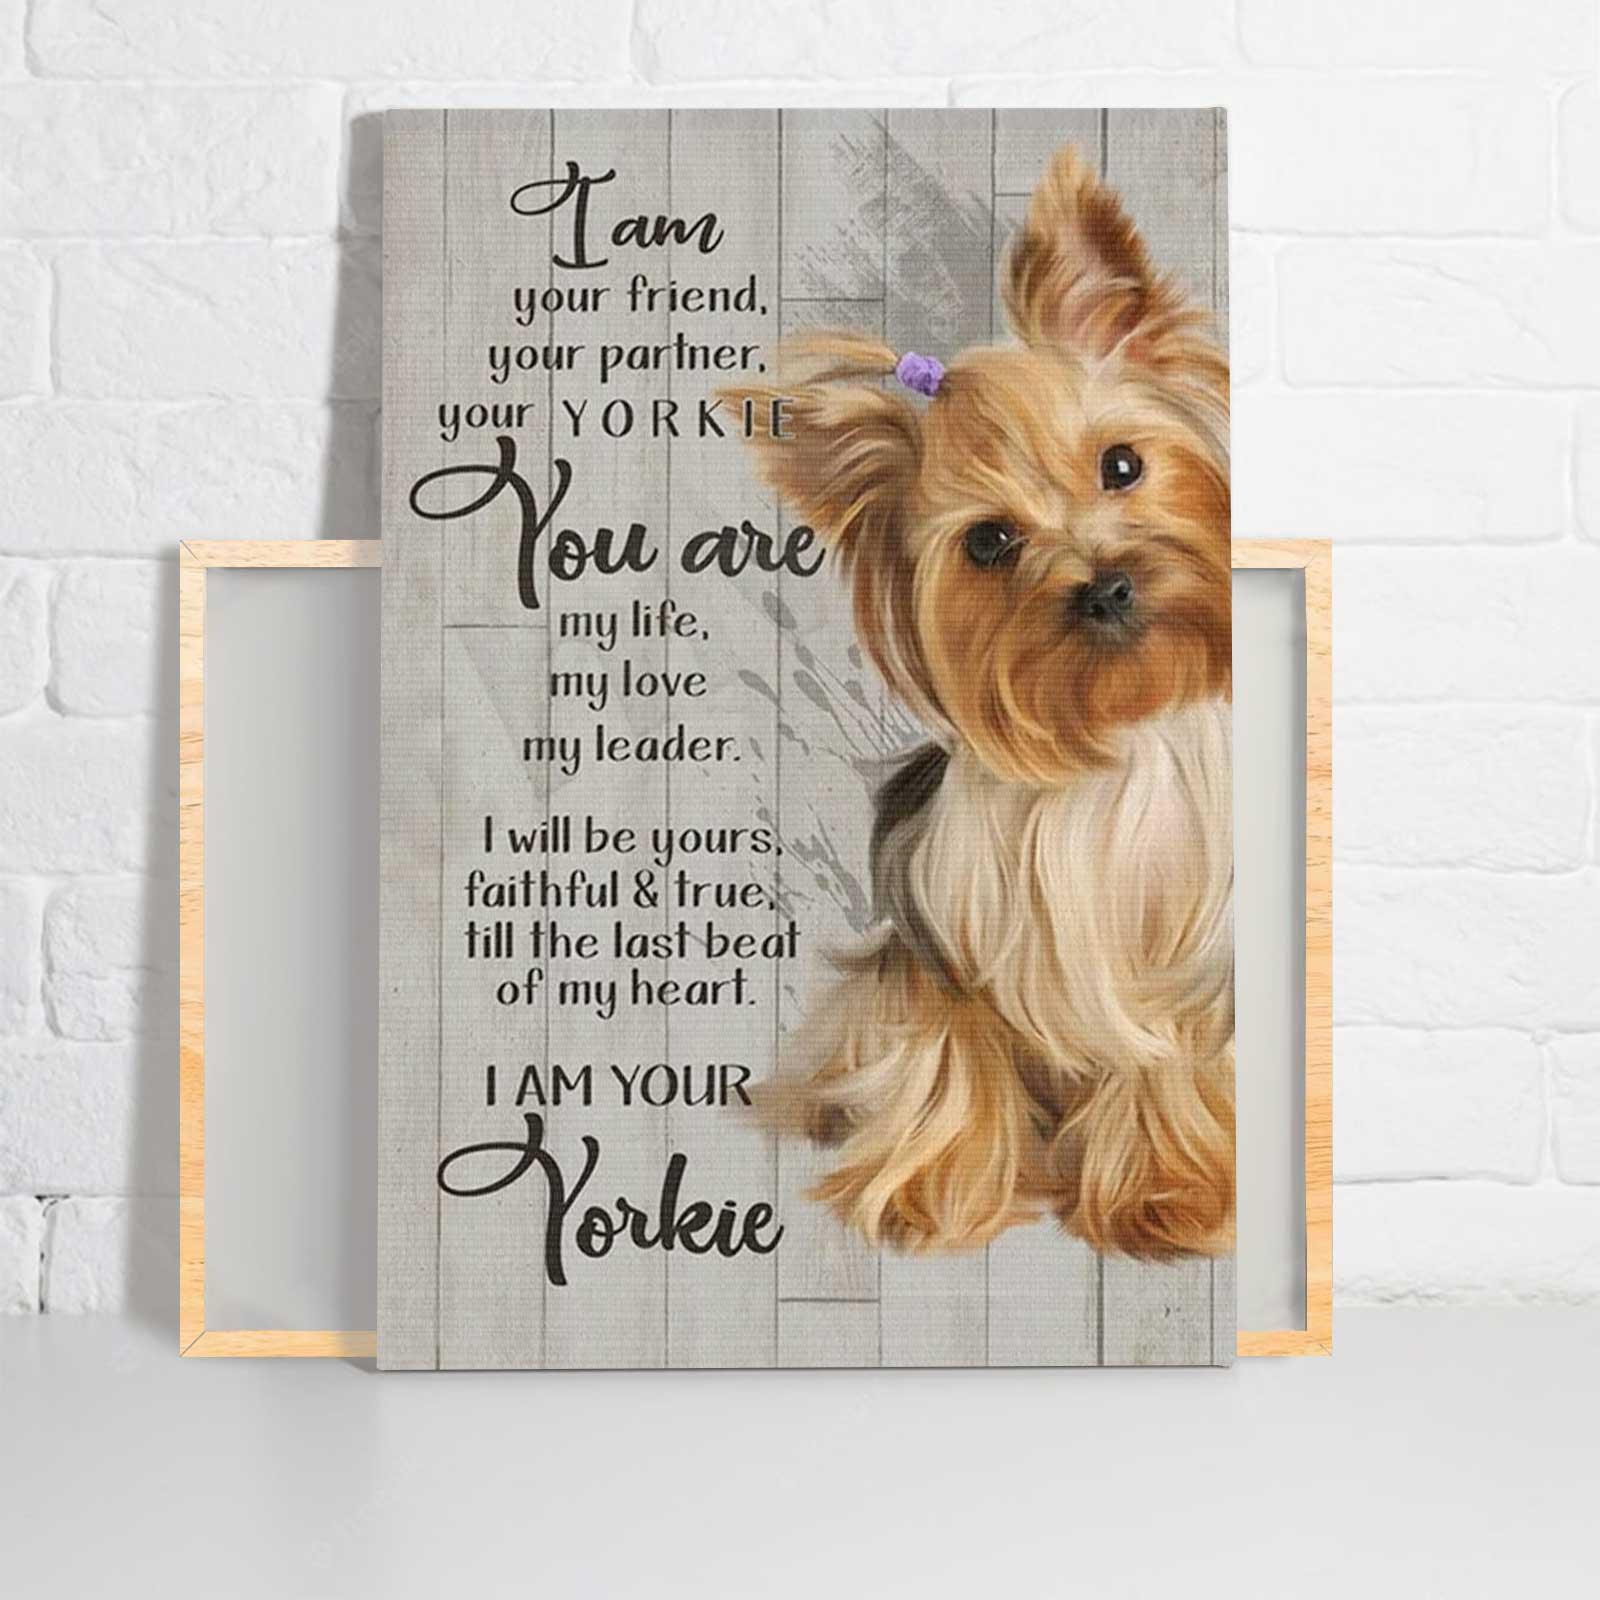 Yorkie Portrait Canvas - Dog I Am Your Friend Your Partner Your Yorkie - Perfect Gift For Family, Friends, Dog Lovers Portrait Canvas Prints - Amzanimalsgift